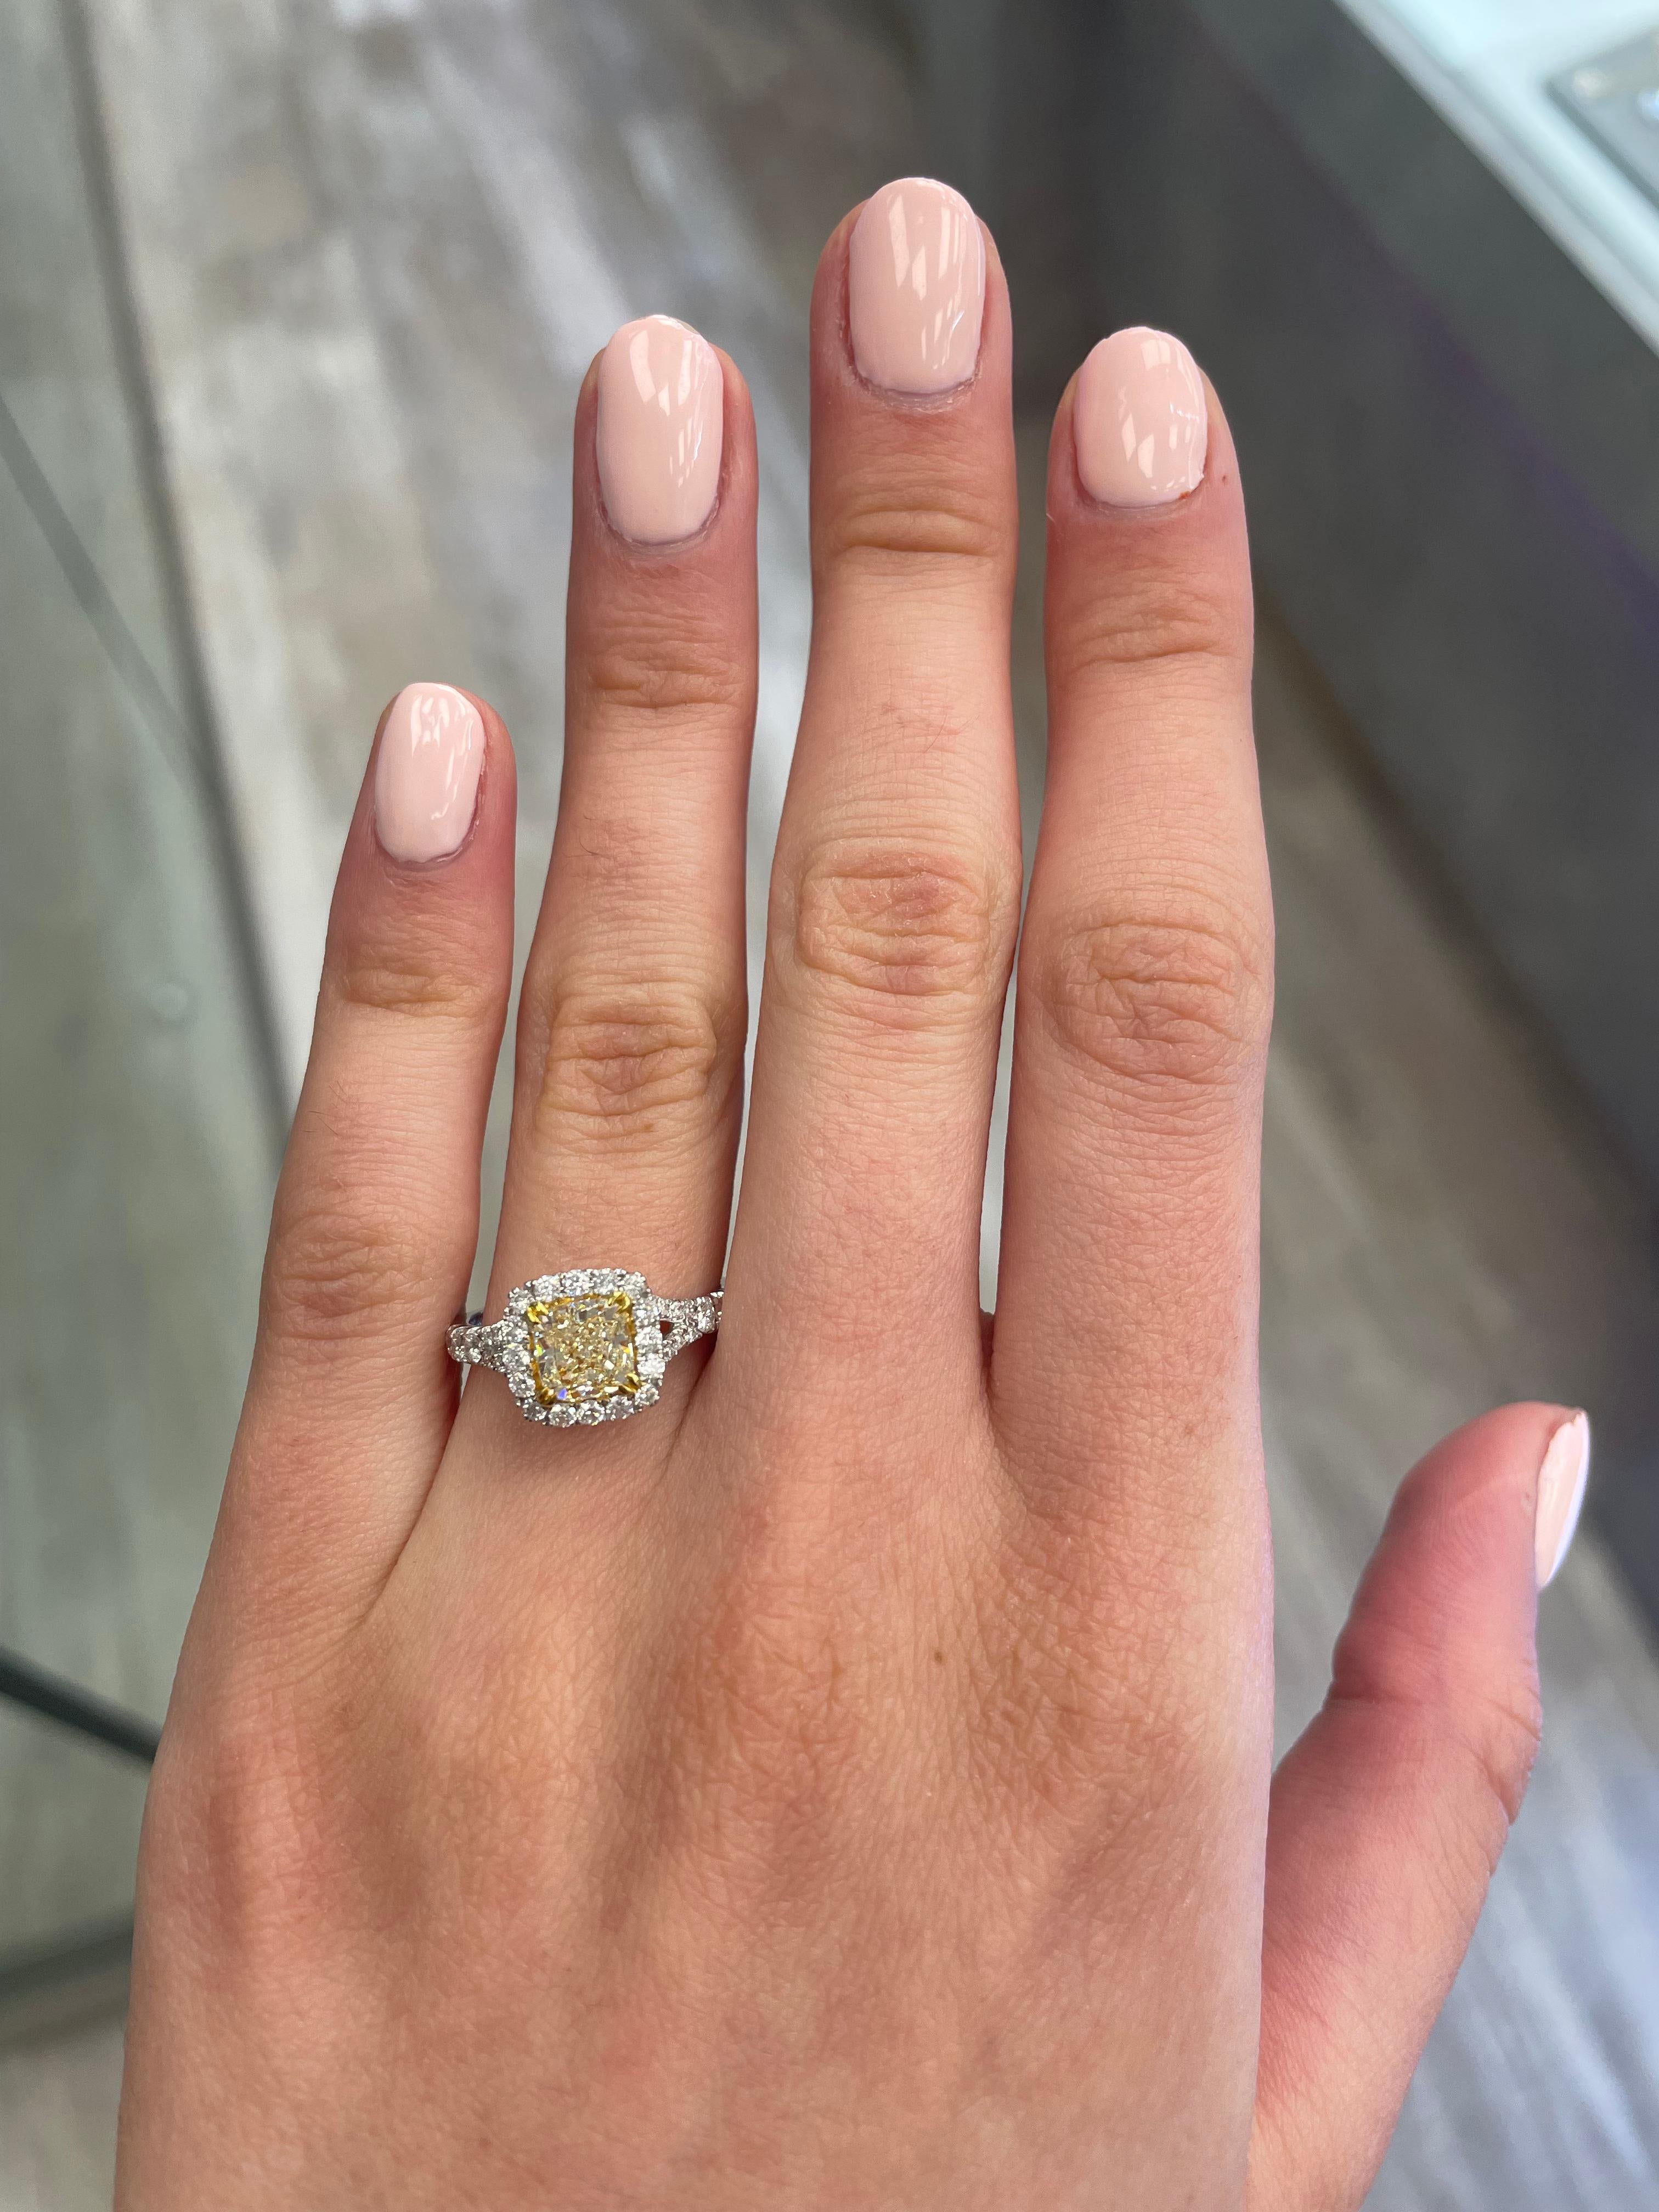 Stunning modern EGL certified yellow diamond with halo ring, two-tone 18k yellow and white gold, split shank. By Alexander Beverly Hills
1.72 carats total diamond weight.
1.14 carat cushion cut Fancy Light Yellow color and VS1 clarity diamond, EGL